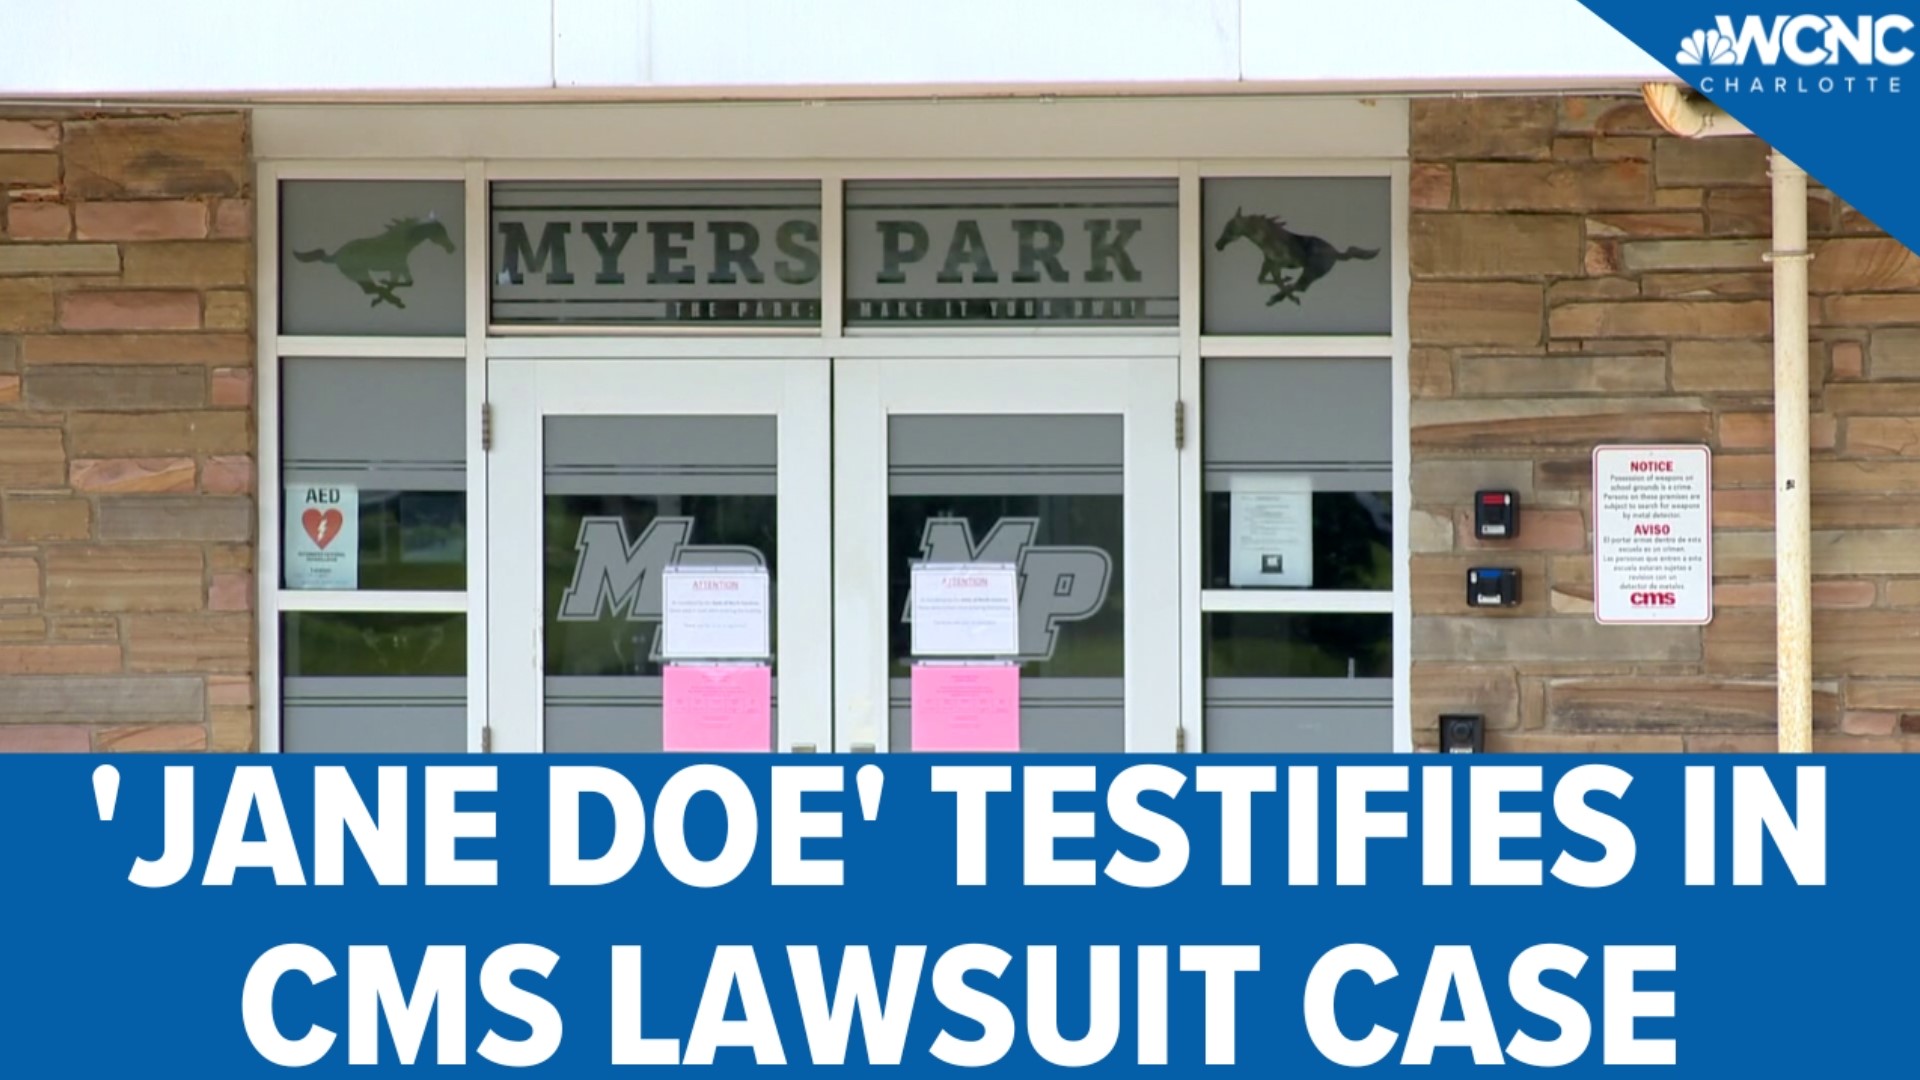 The suit says the city and school did not protect a student from getting raped on the campus of Myers Park High School back in 2015.